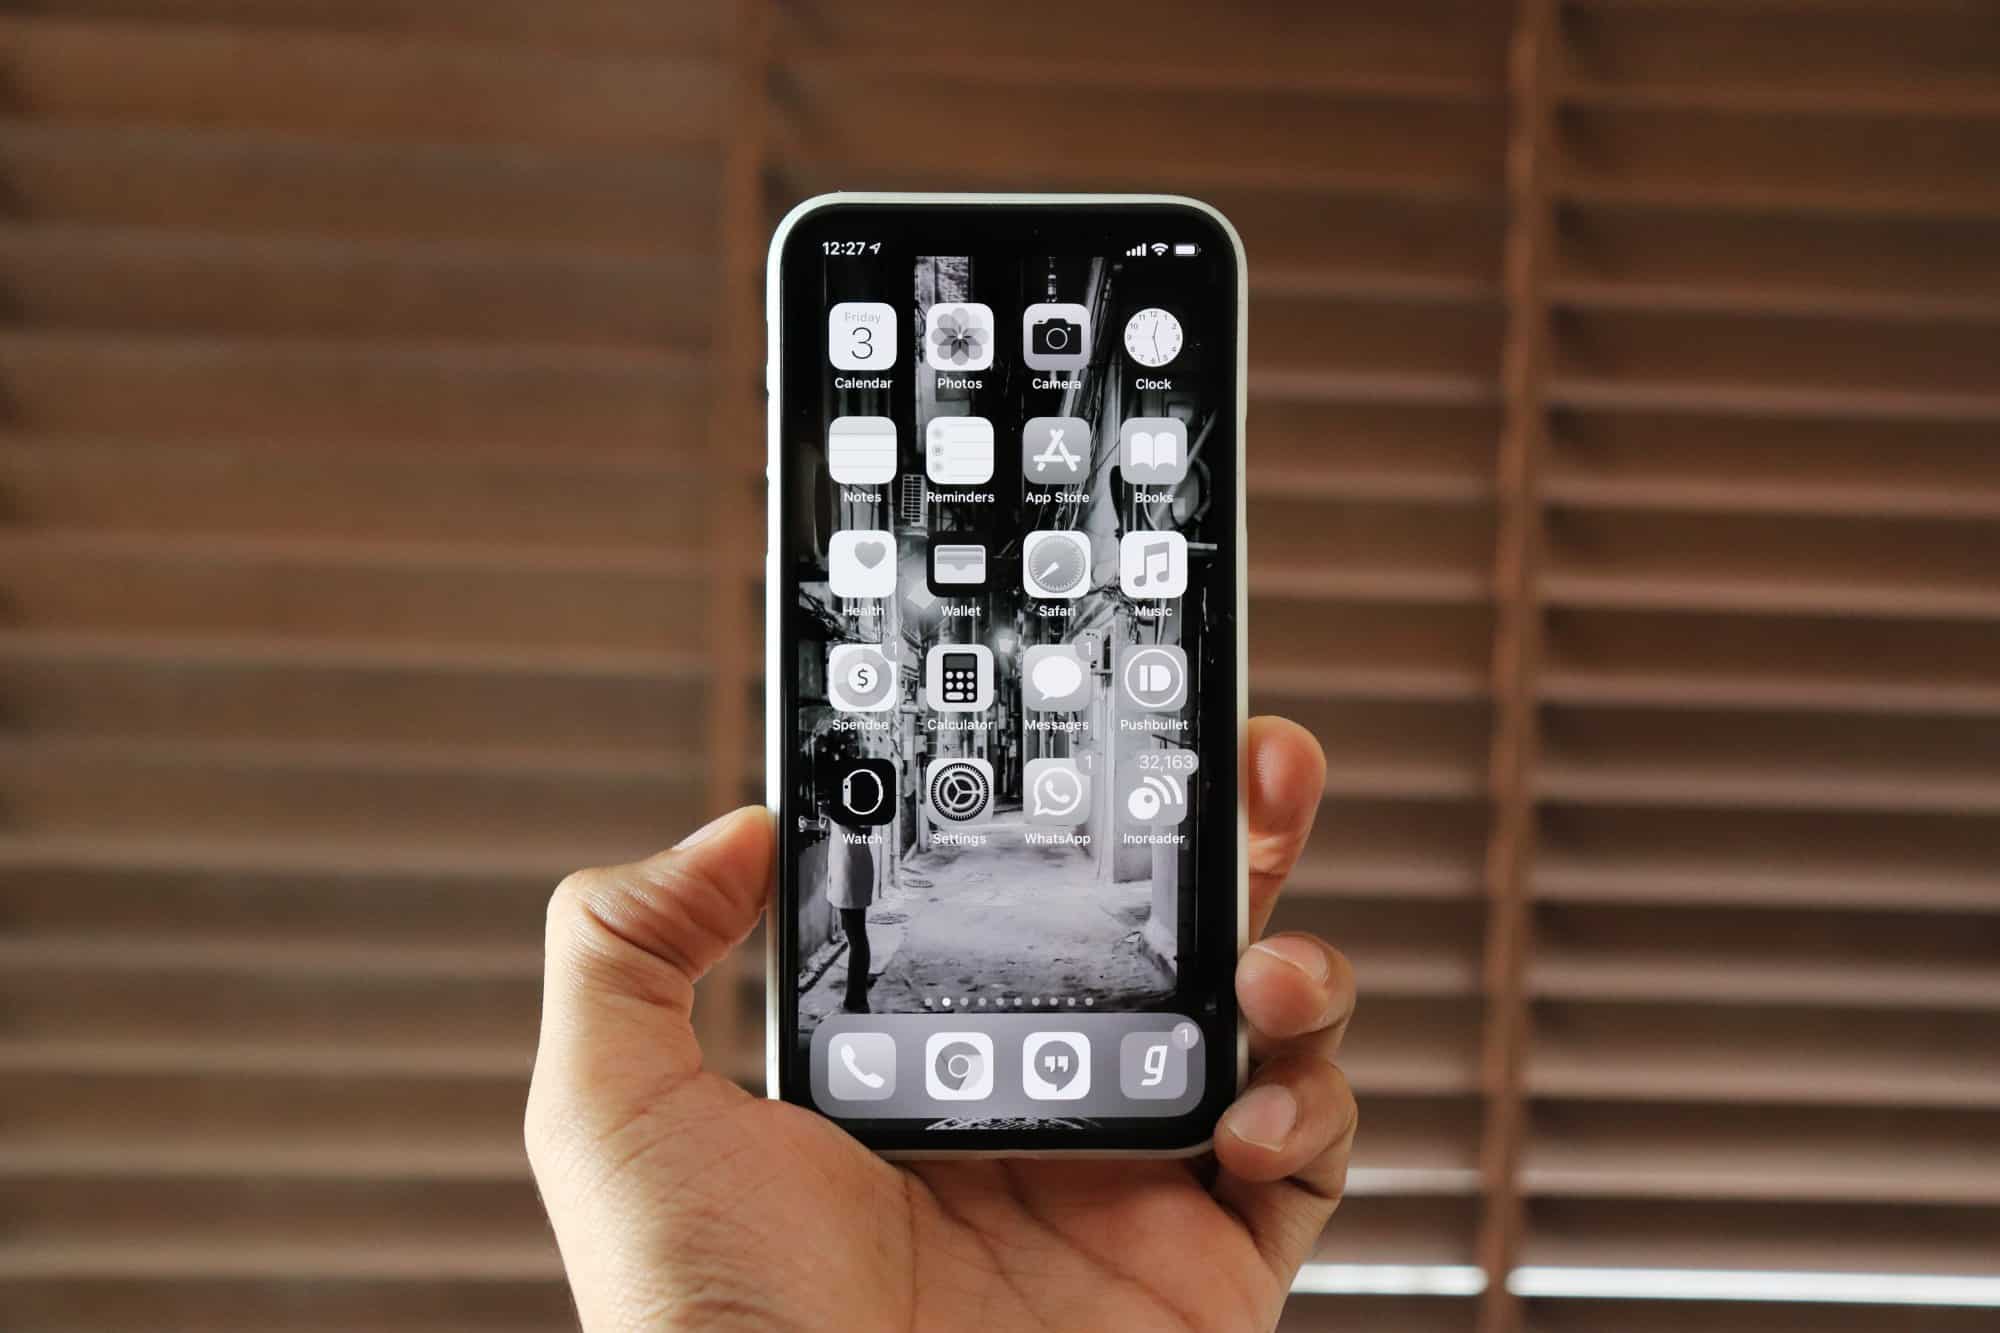 iPhone Screen turned Grayscale, shows no color? Here's a fix